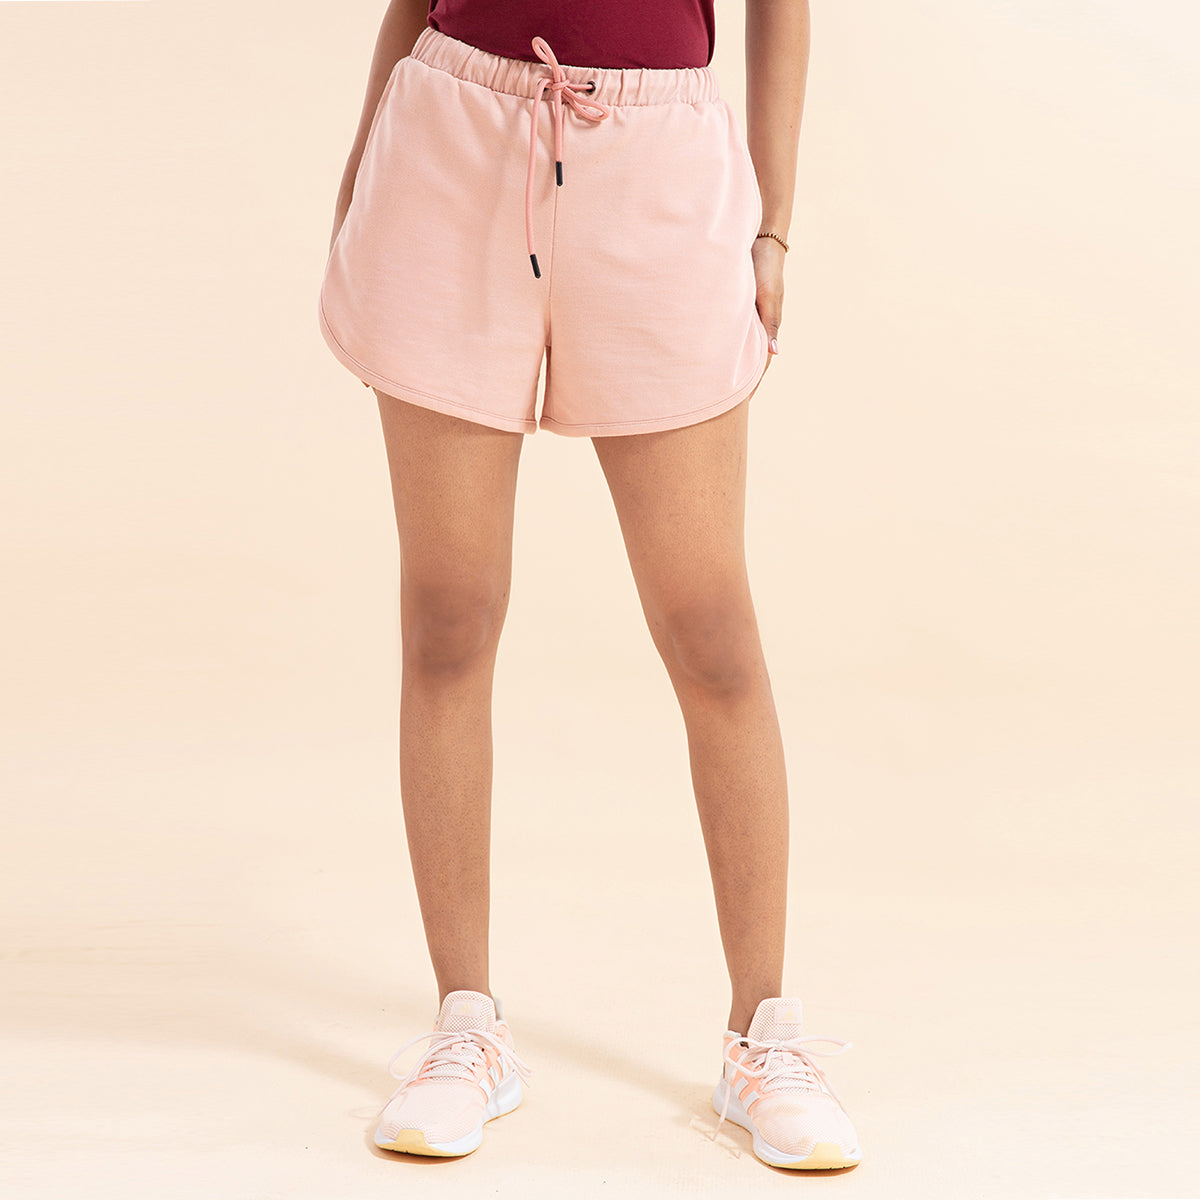 Chill- Pill Cotton Terry Shorts , Nykd All Day-NYK 039  Evening Sand Pink